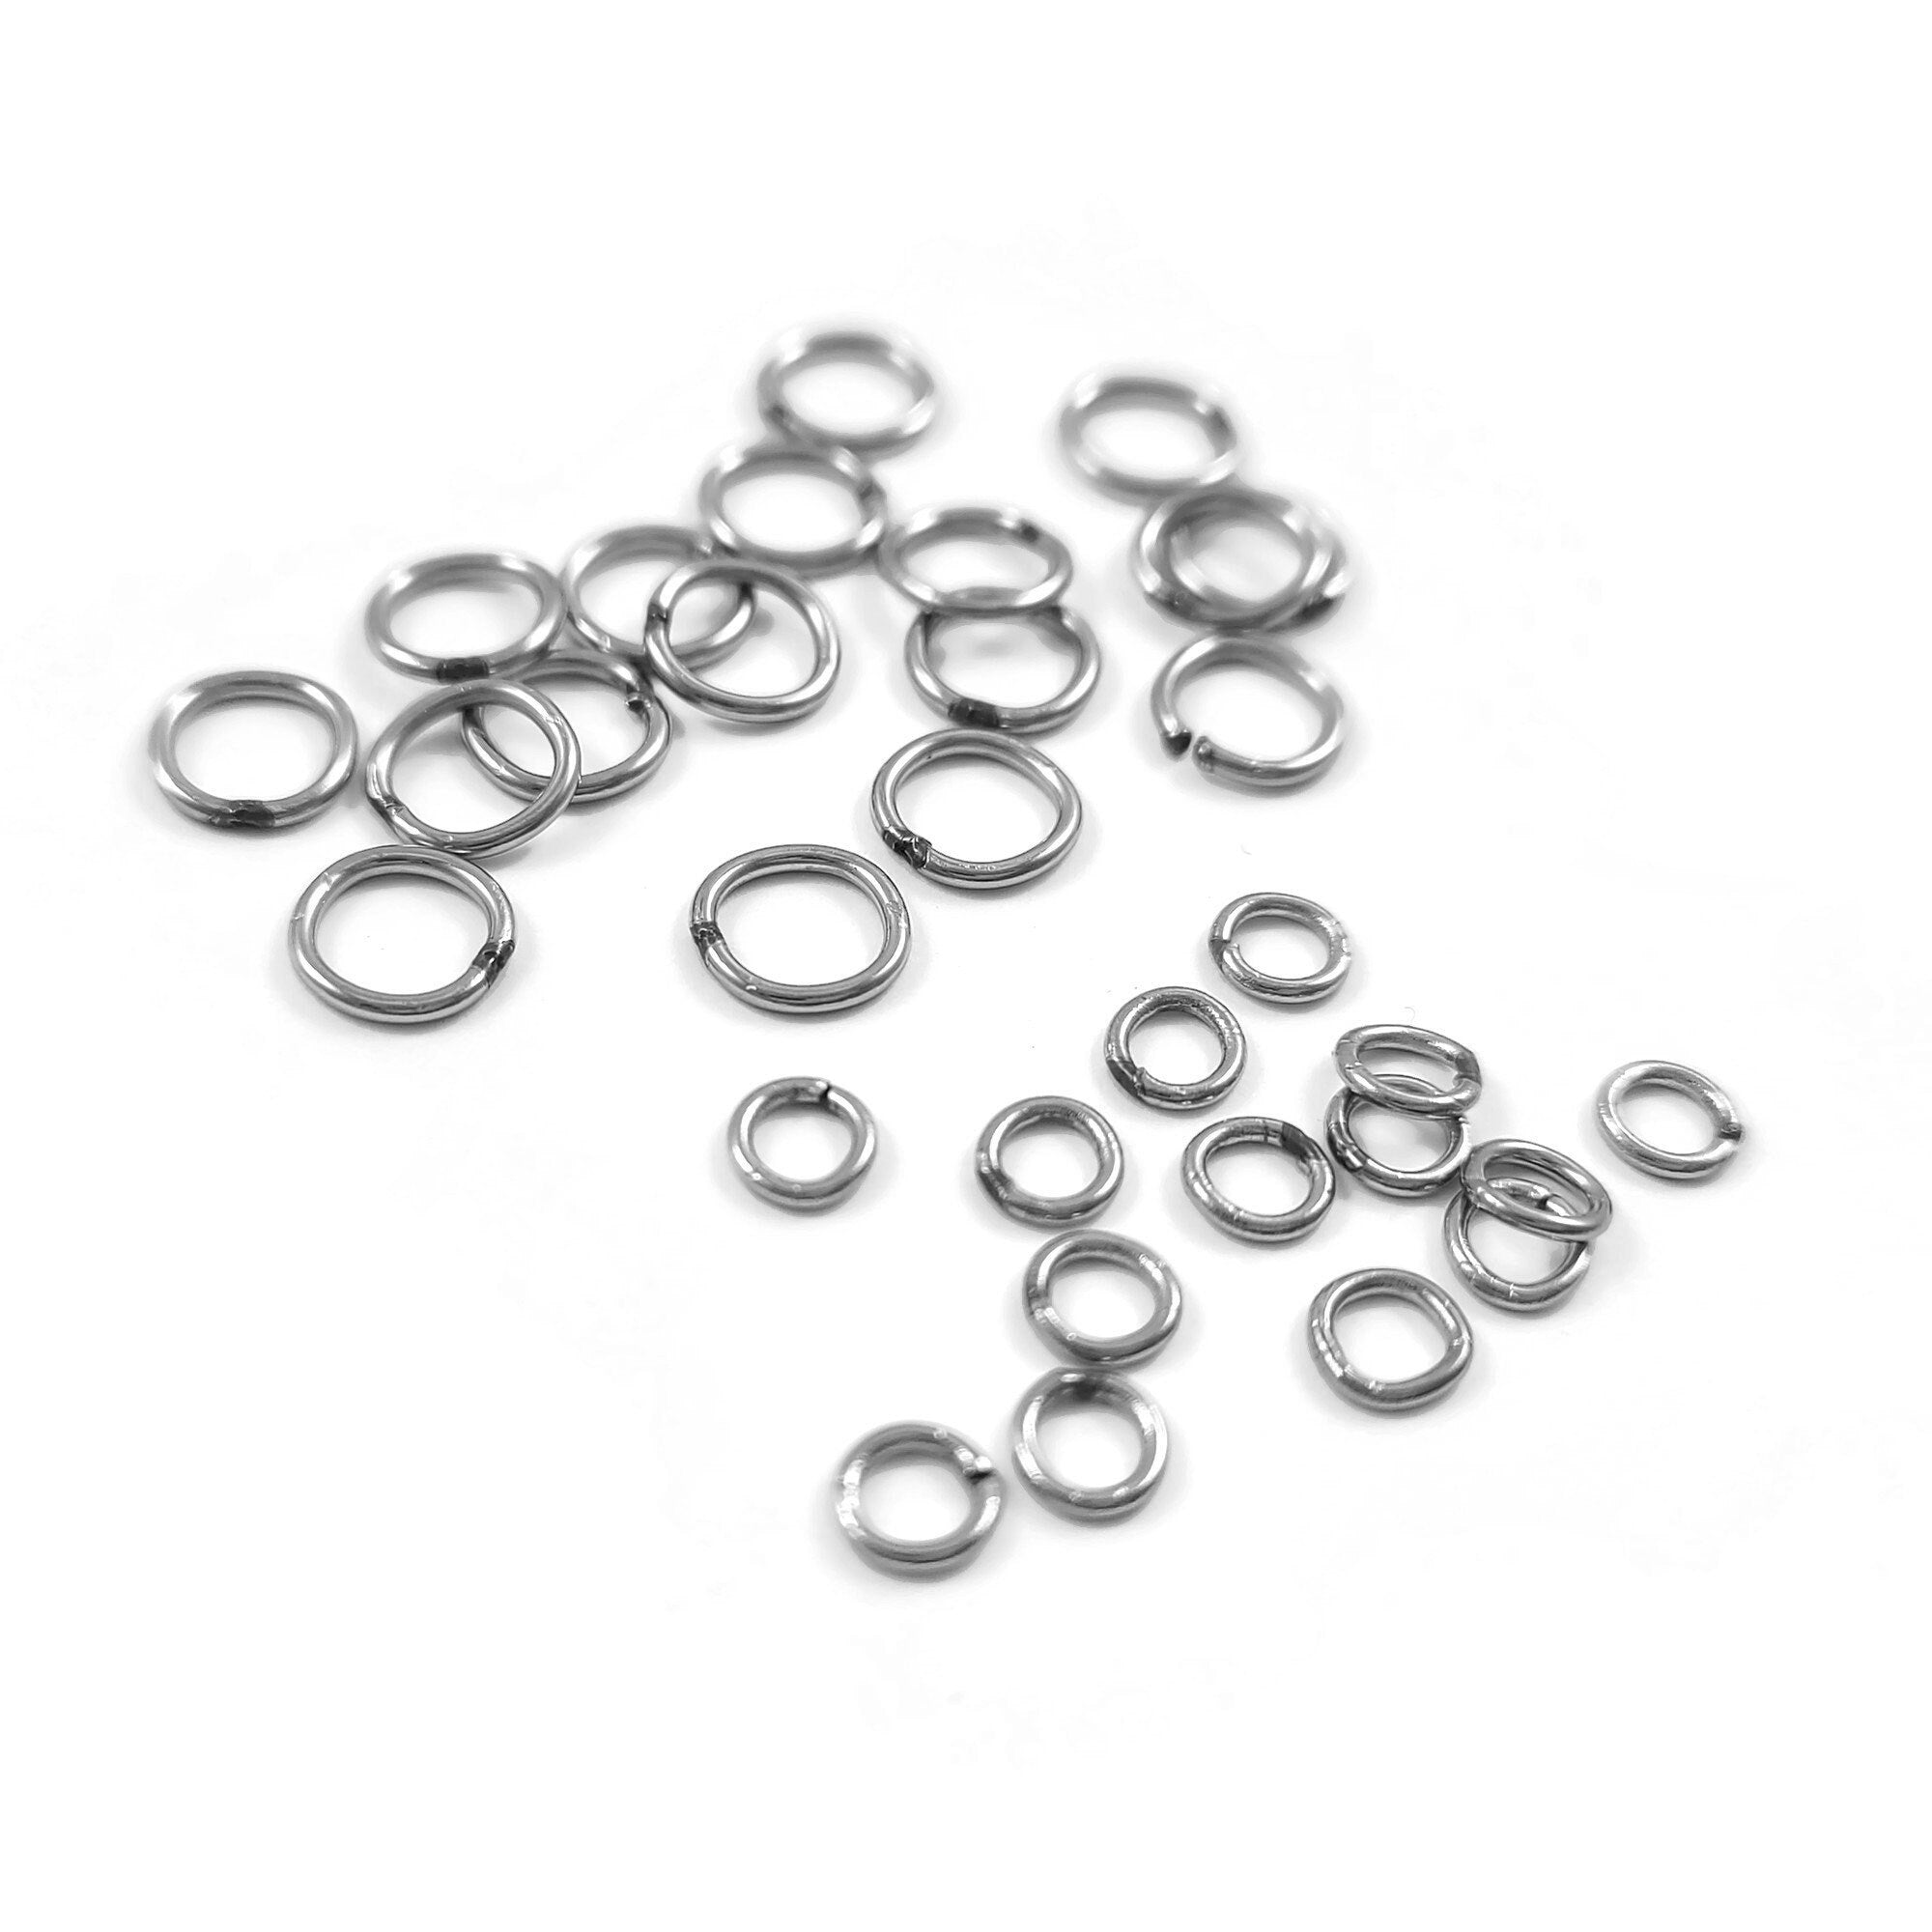 Large Oval Jump Rings, 10pcs Stainless Steel Open Jumprings, 12 Gauge  Hardware for Jewelry Making 